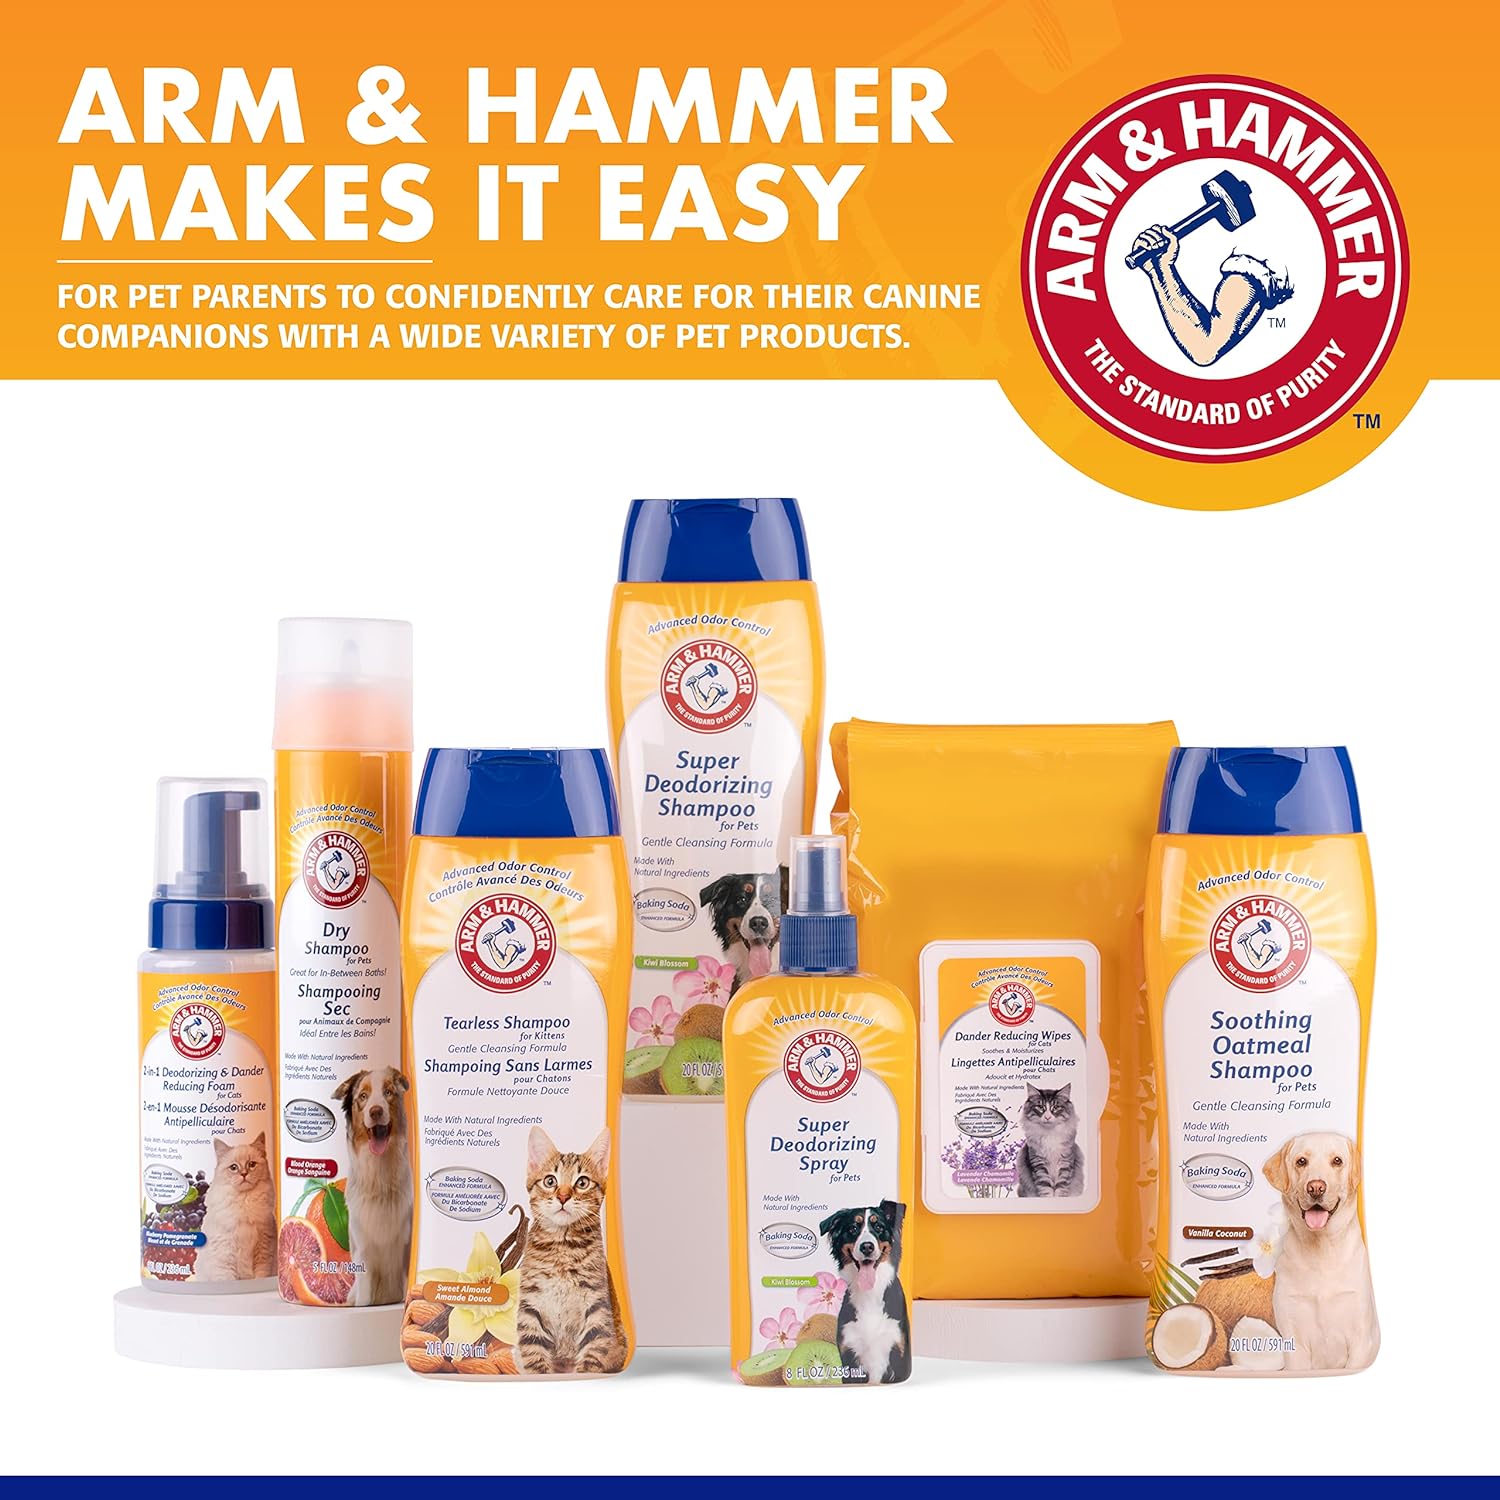 Arm & Hammer for Pets Oatmeal Shampoo for Dogs | Best Dog Shampoo for Dry, Itchy Skin | Soothing Oatmeal Dog Shampoos in Warm and Inviting Vanilla Coconut Scent, 16 oz,White